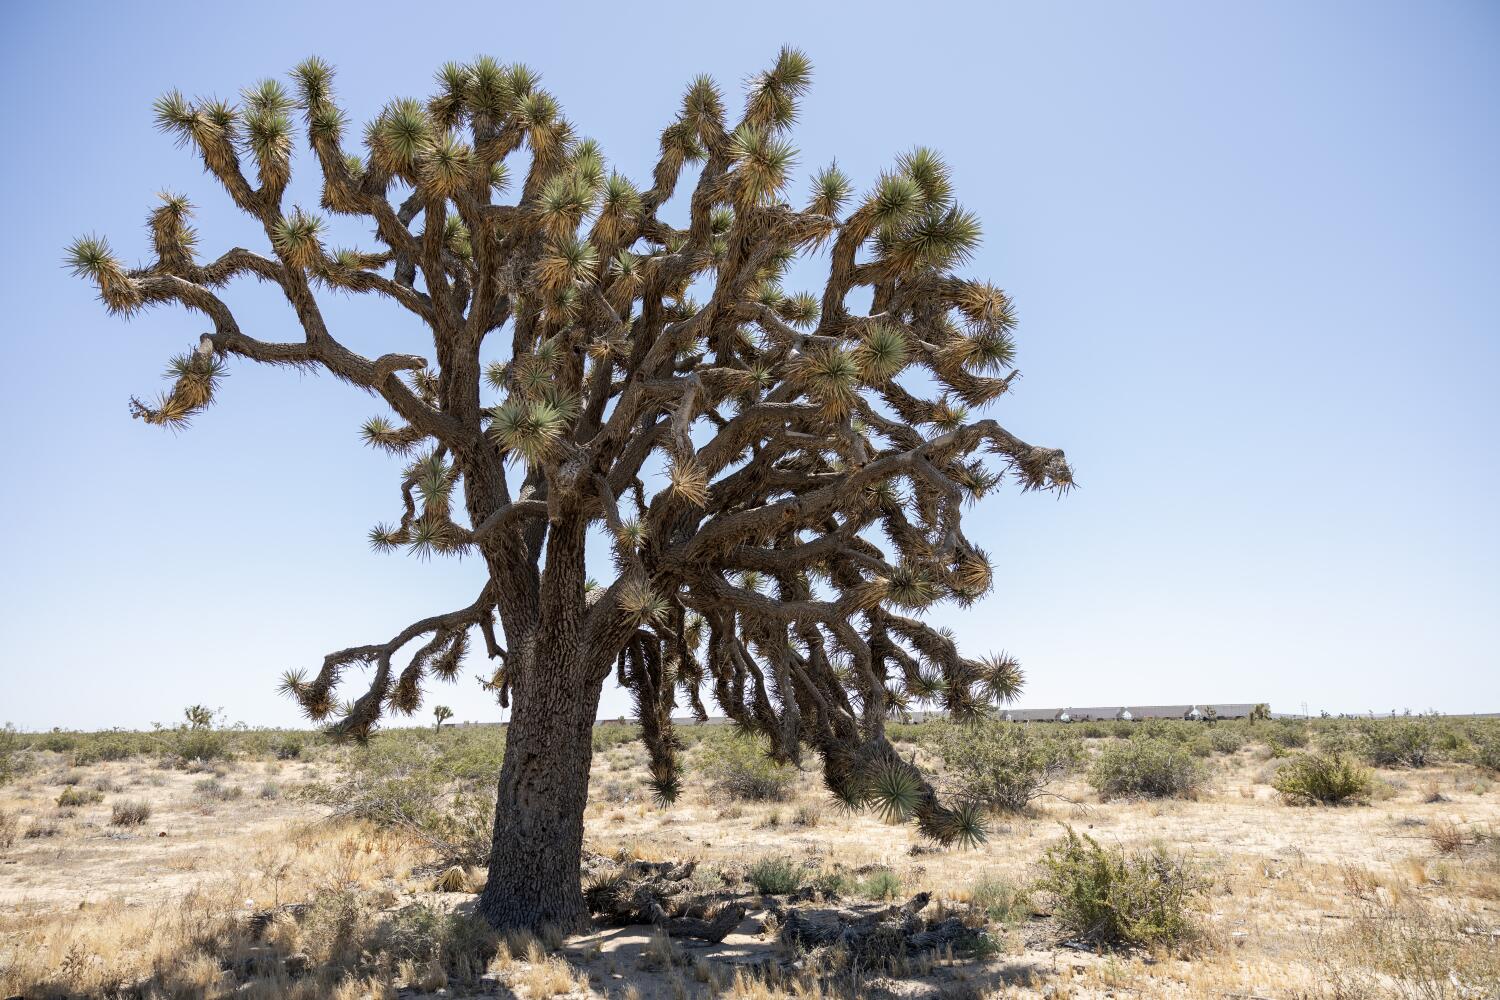 Image for display with article titled Solar Project to Destroy Thousands of Joshua Trees in the Mojave Desert